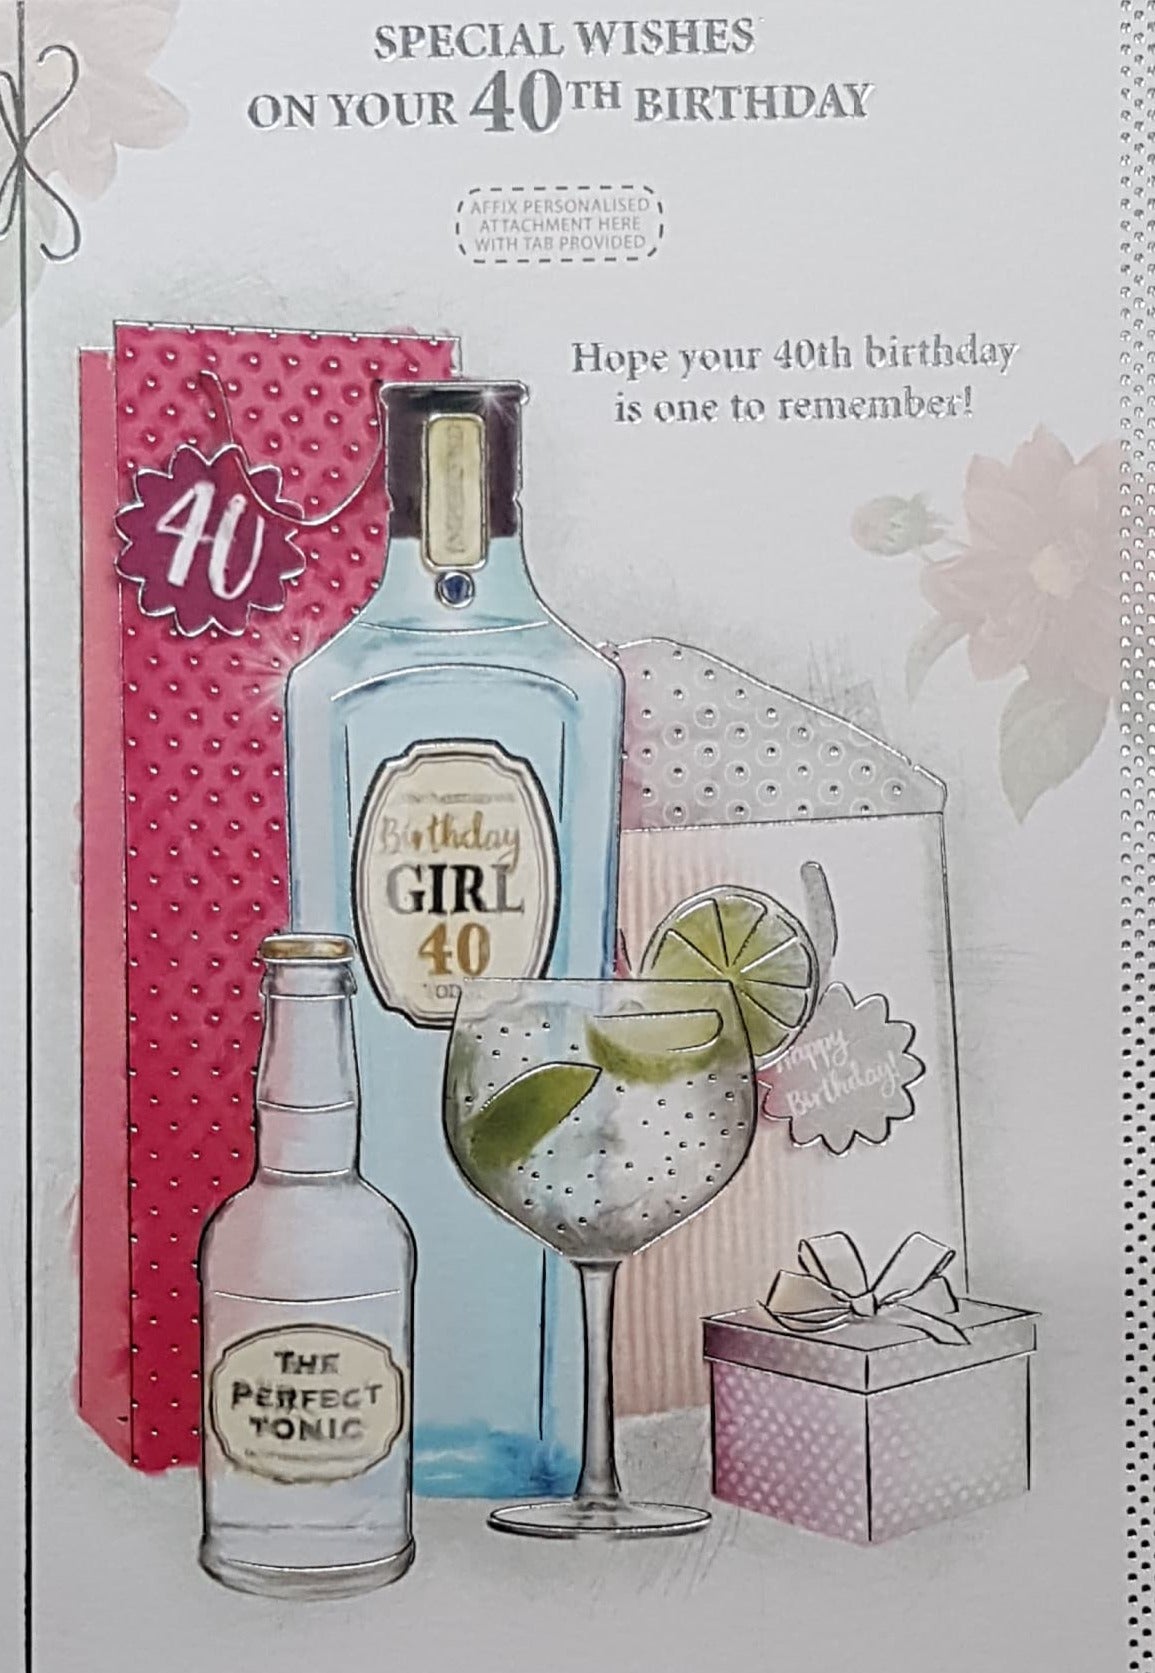 Personalised Card - Age 40 Birthday / A Glass Of Gin & Tonic & Lime Slices